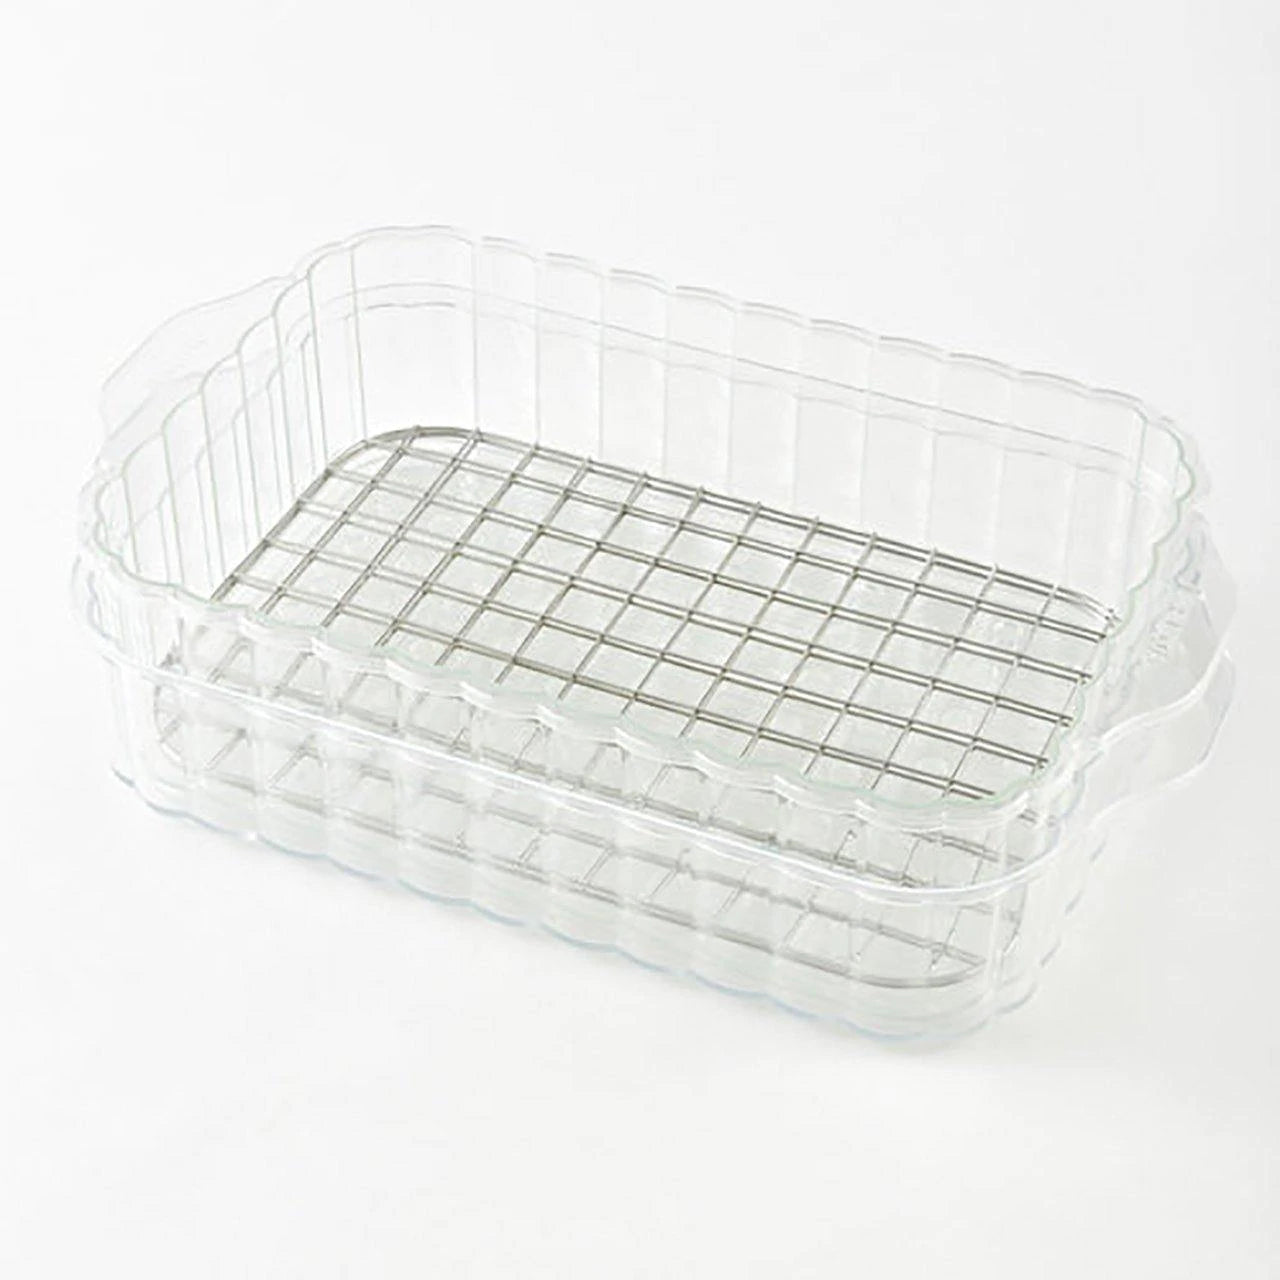 BRUNO Double Steamer Rack (for Compact Hot Plate)